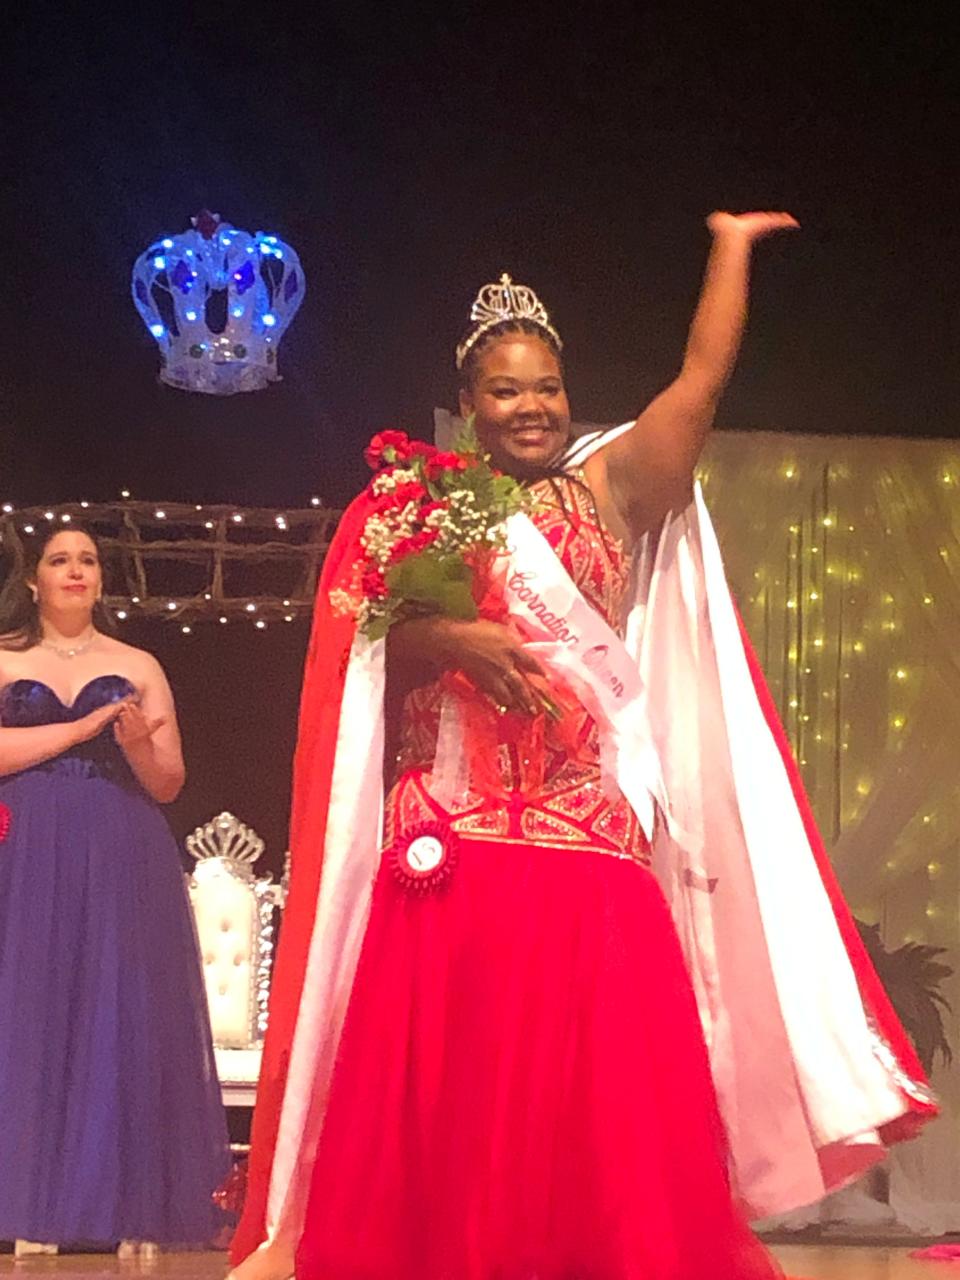 Kayla Martin, 19, a sophomore at the University of Mount Union and 2021 graduate of Alliance High School, was crowned 2022 Carnation Festival Queen on Saturday, July 30, 2022.